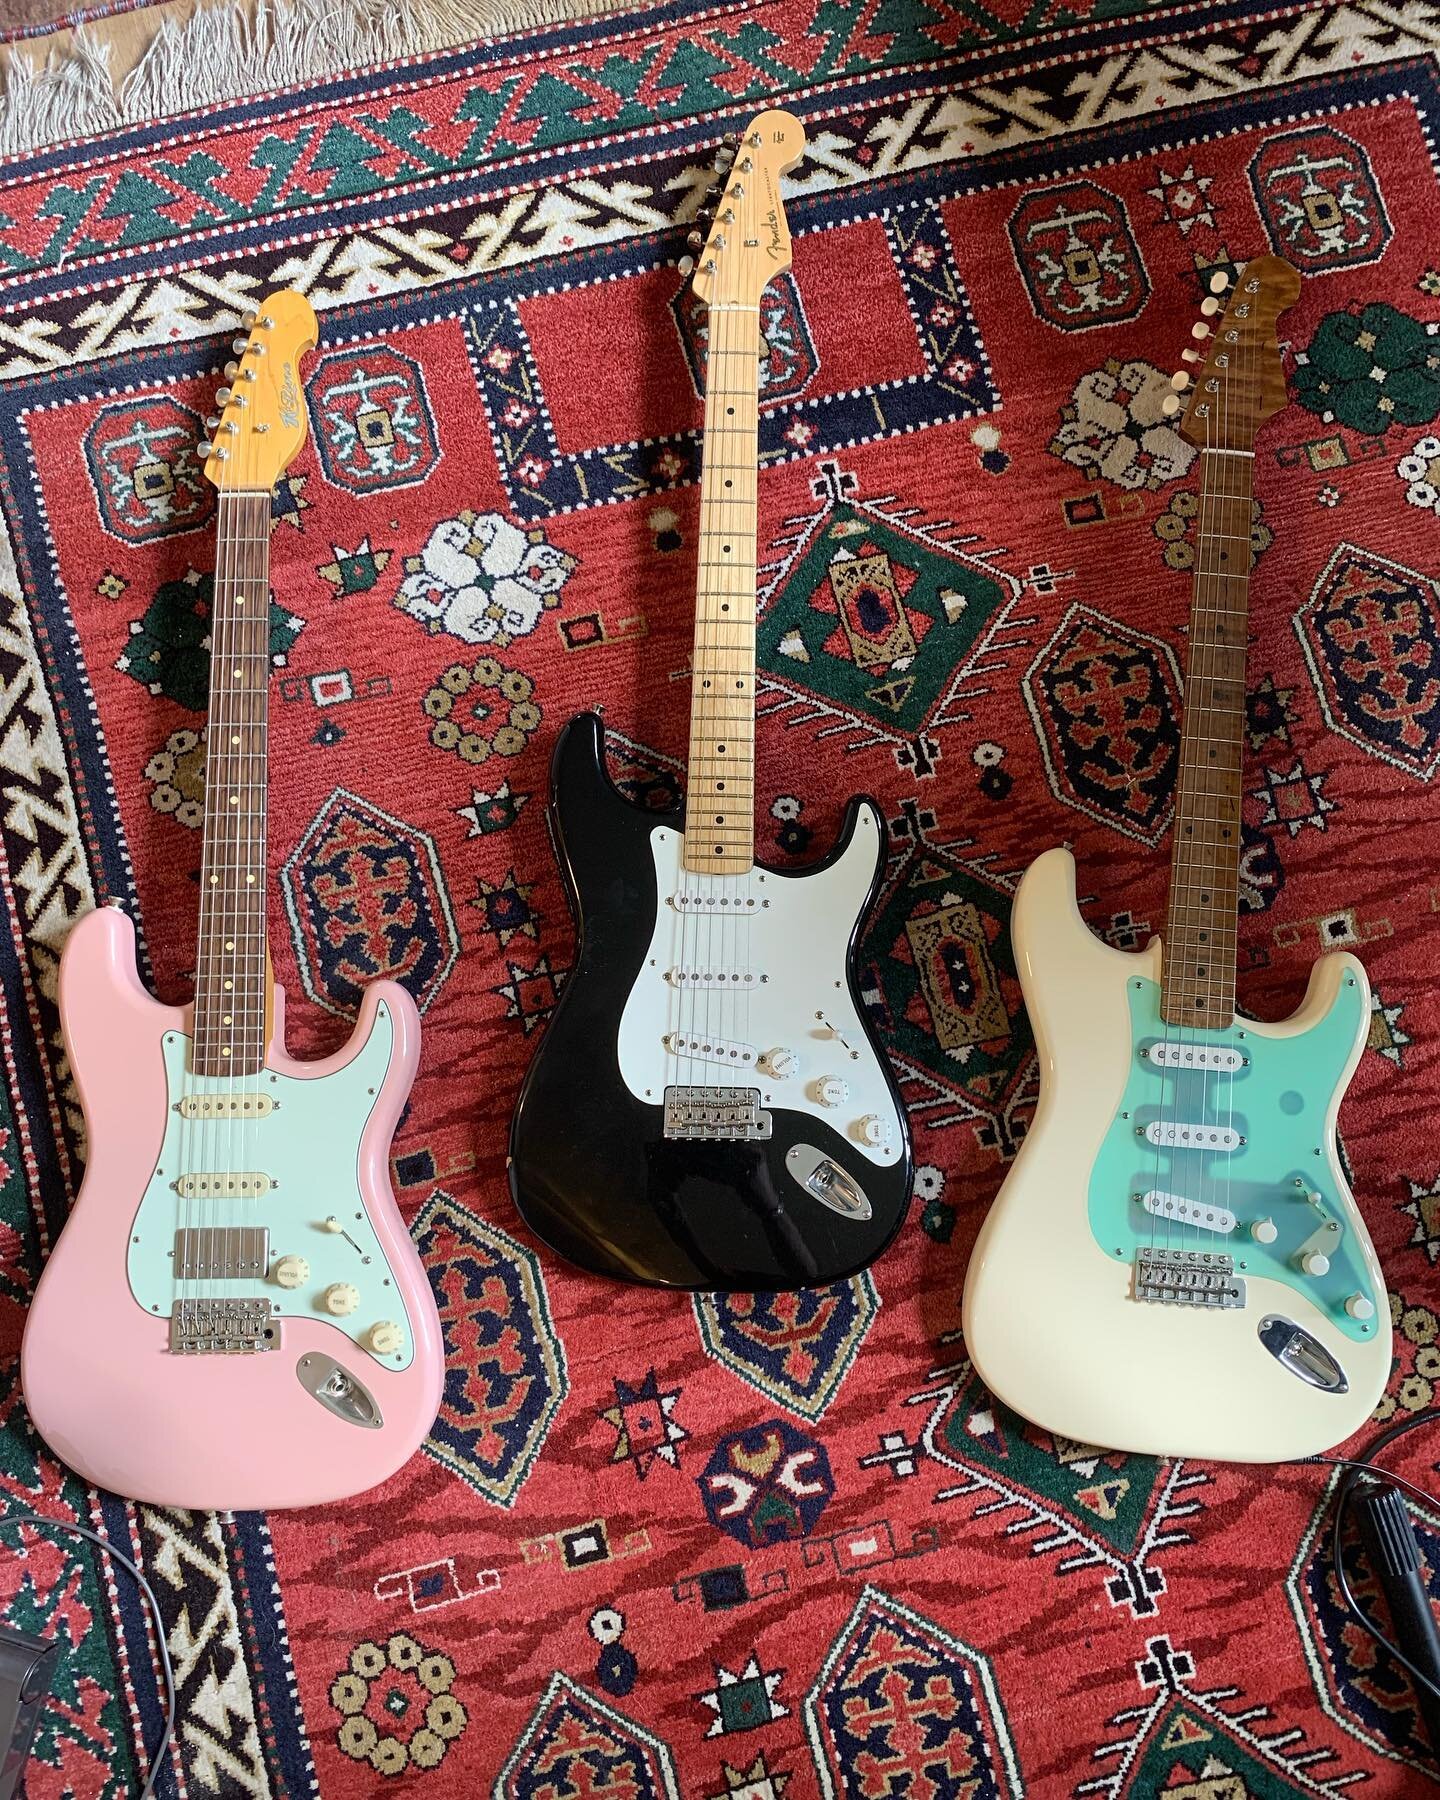 It&rsquo;s a bonafide #straturday at my house today 🎸 I&rsquo;m loving the diversity in necks we have here
.
:
.
:
.
:
#guitar #stratocaster #guitartech #luthier